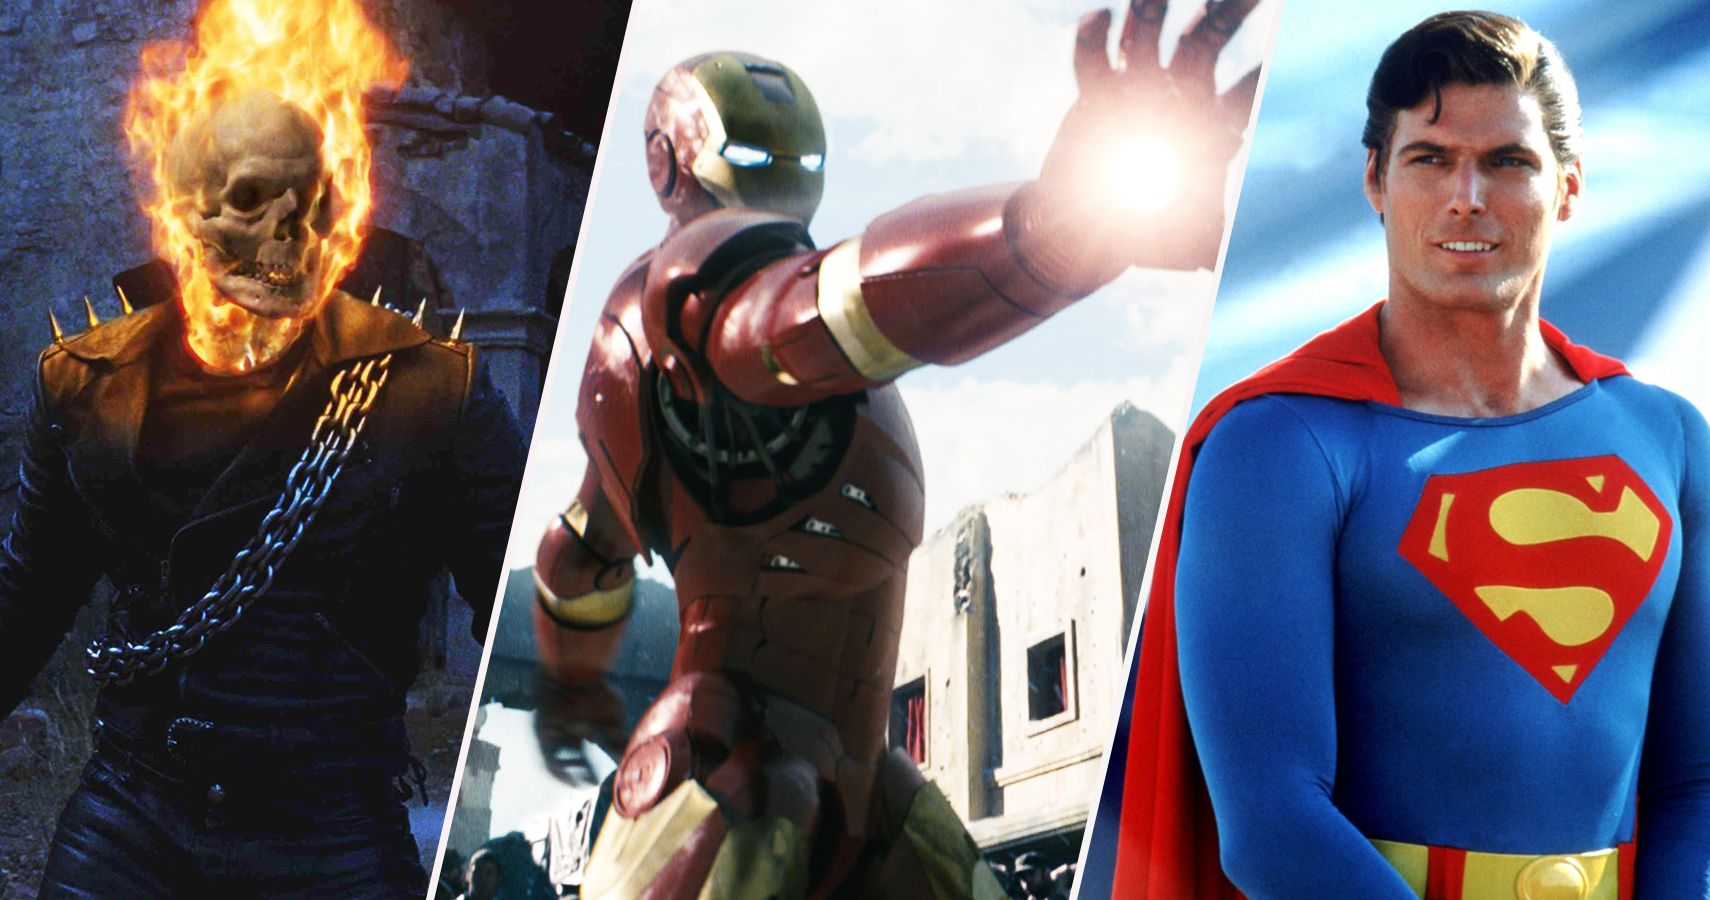 The 20 Worst Superhero Movies According To The Critics (And The 10 Very